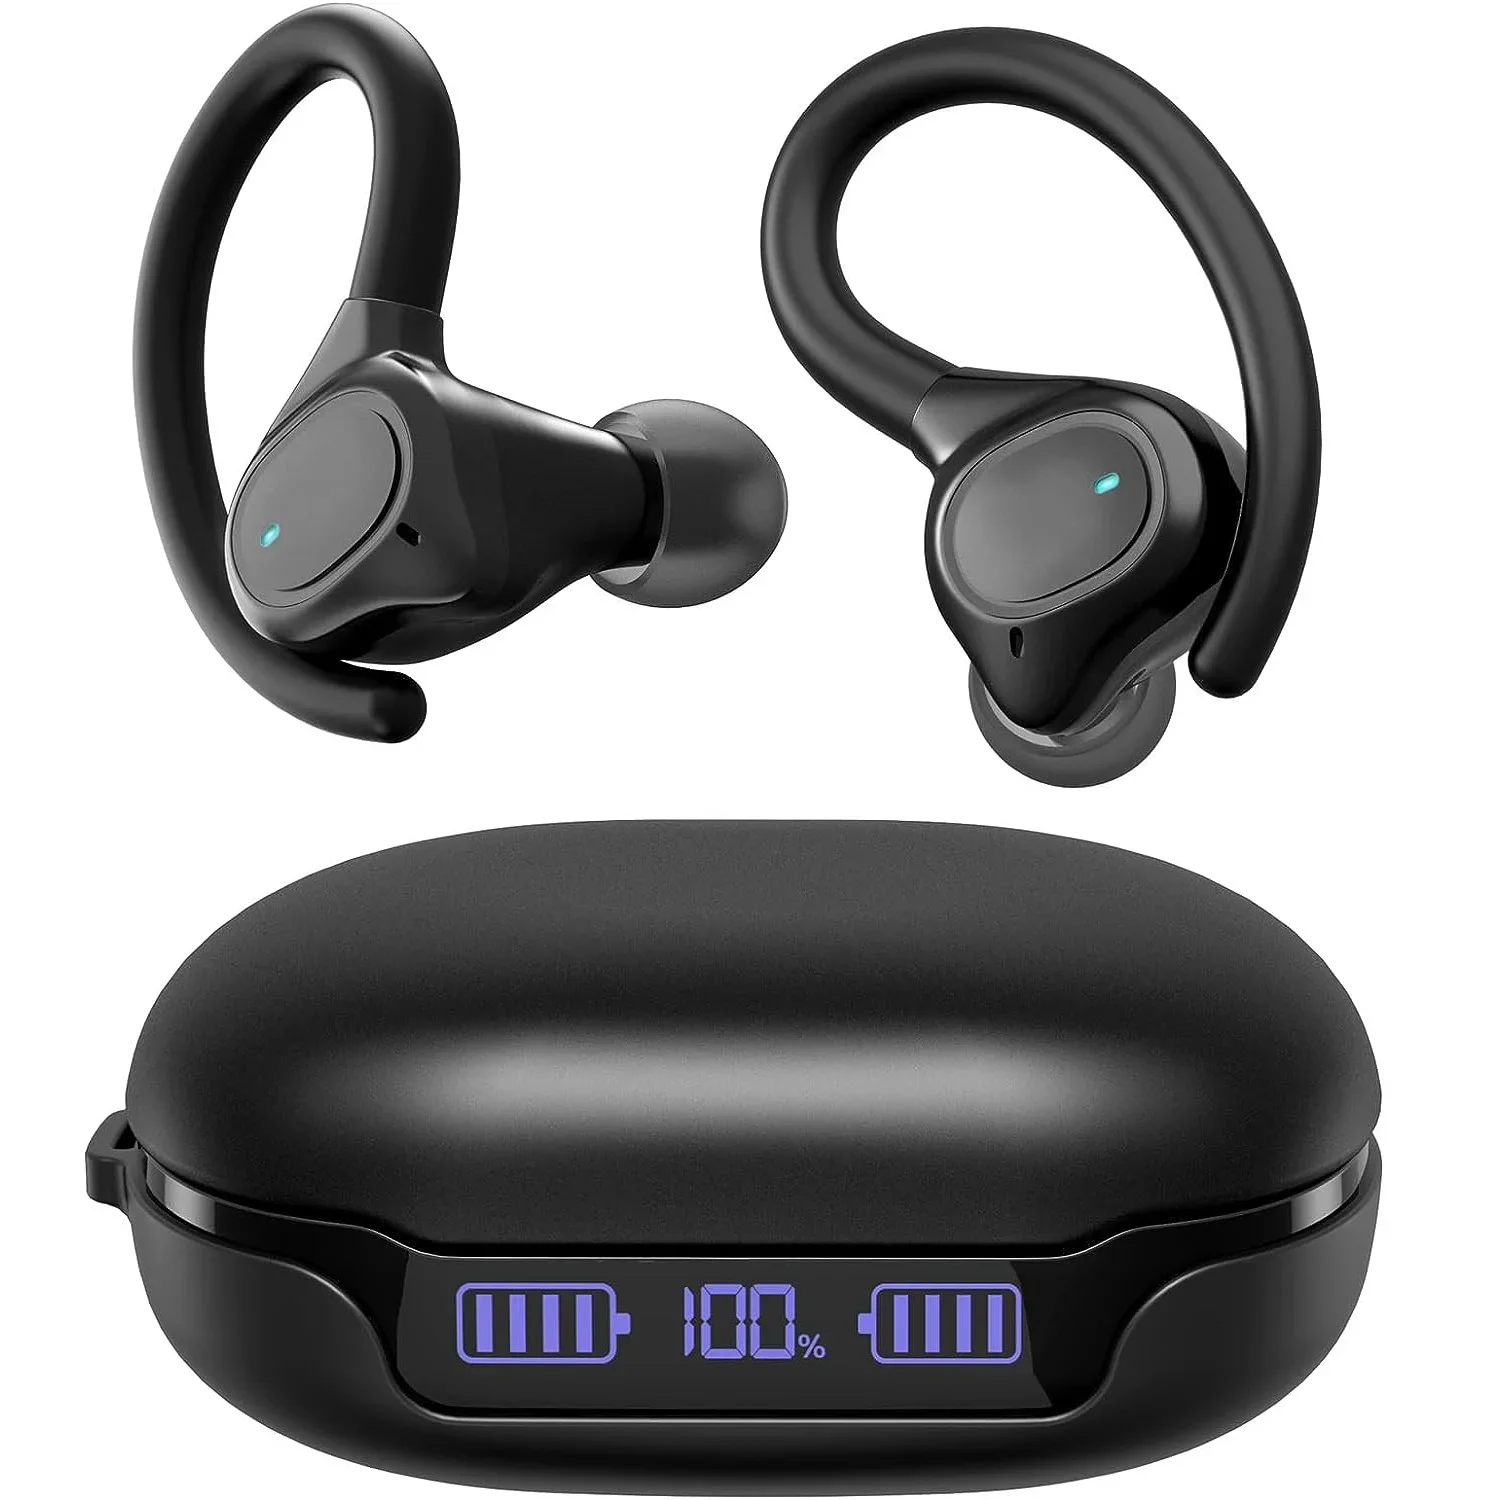 

New BE1049 Wireless Bluetooth Headset 5.3 Earphones Headphone with Dual Mic Hands-free TWS Earbuds ENC Noise Cancelling Earpiece